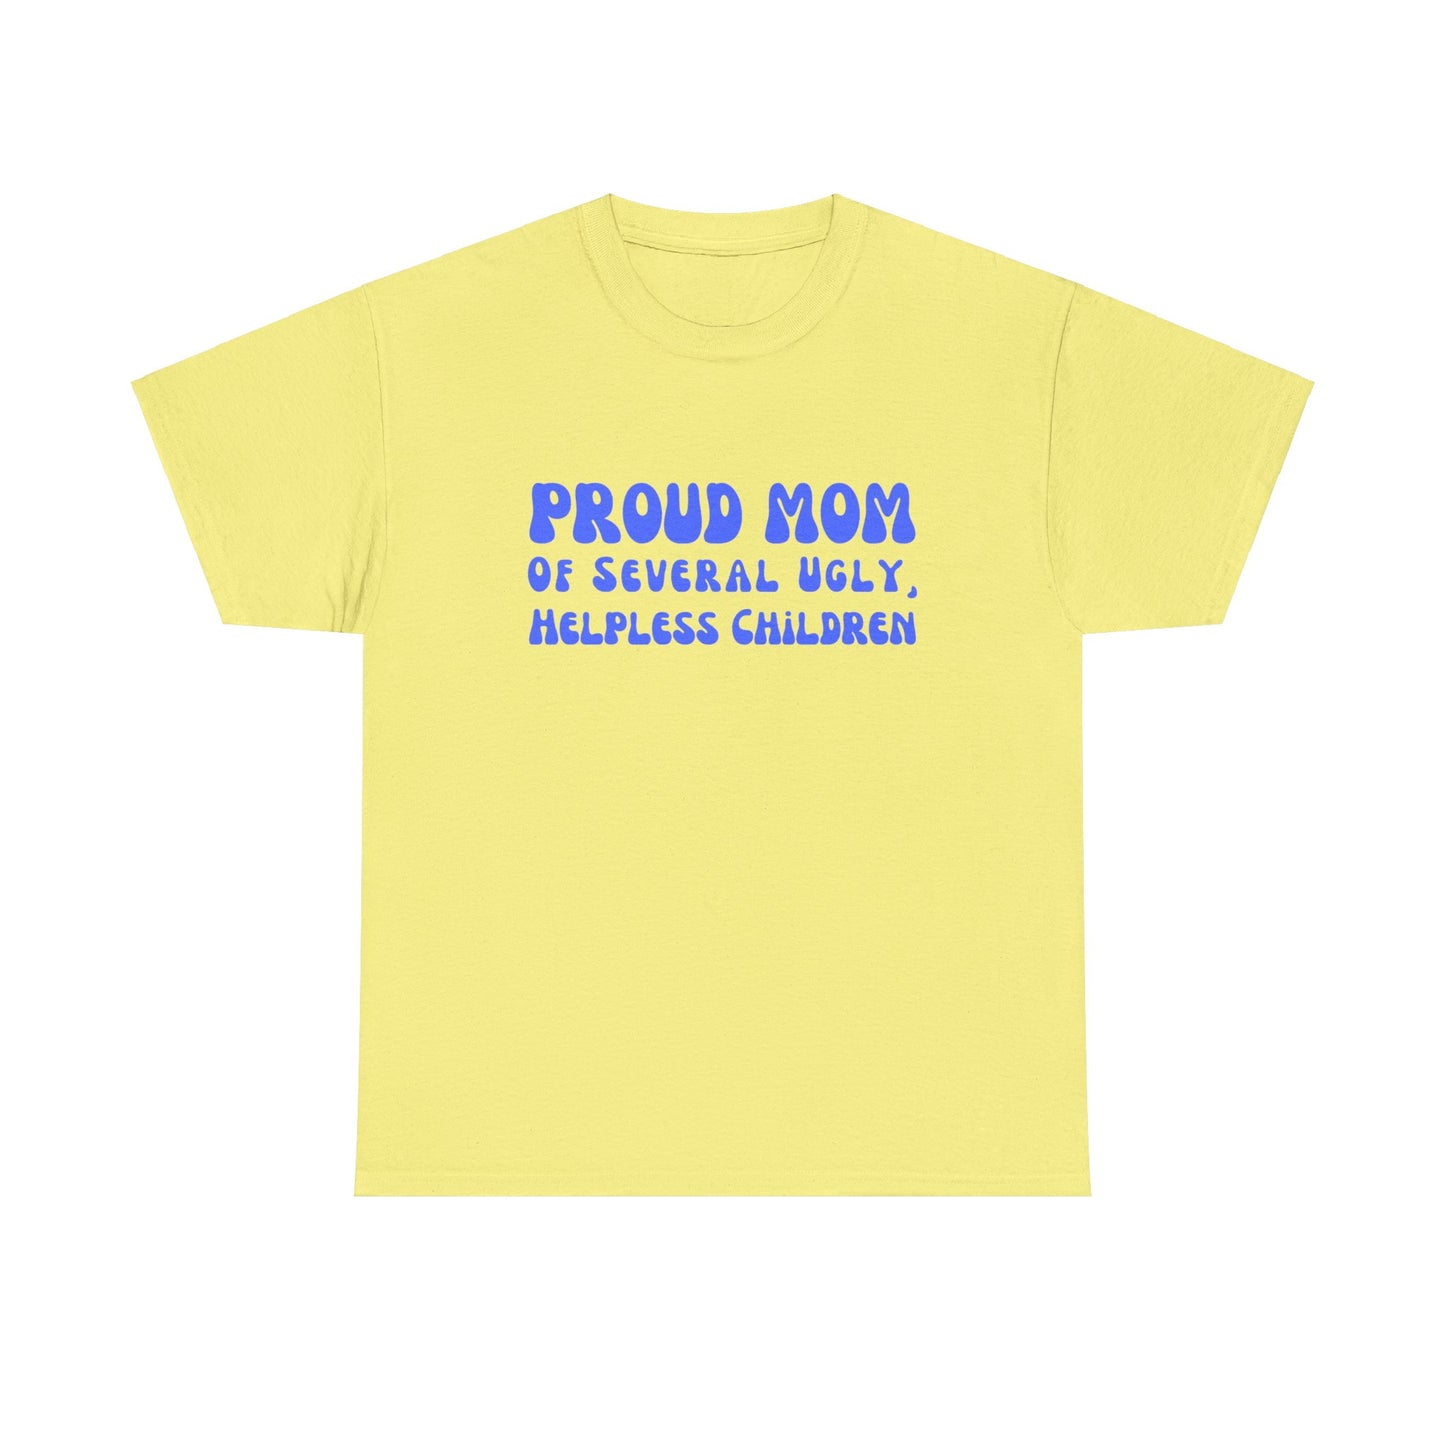 "Proud Mom Of Several Ugly, Helpless Children" Shirt